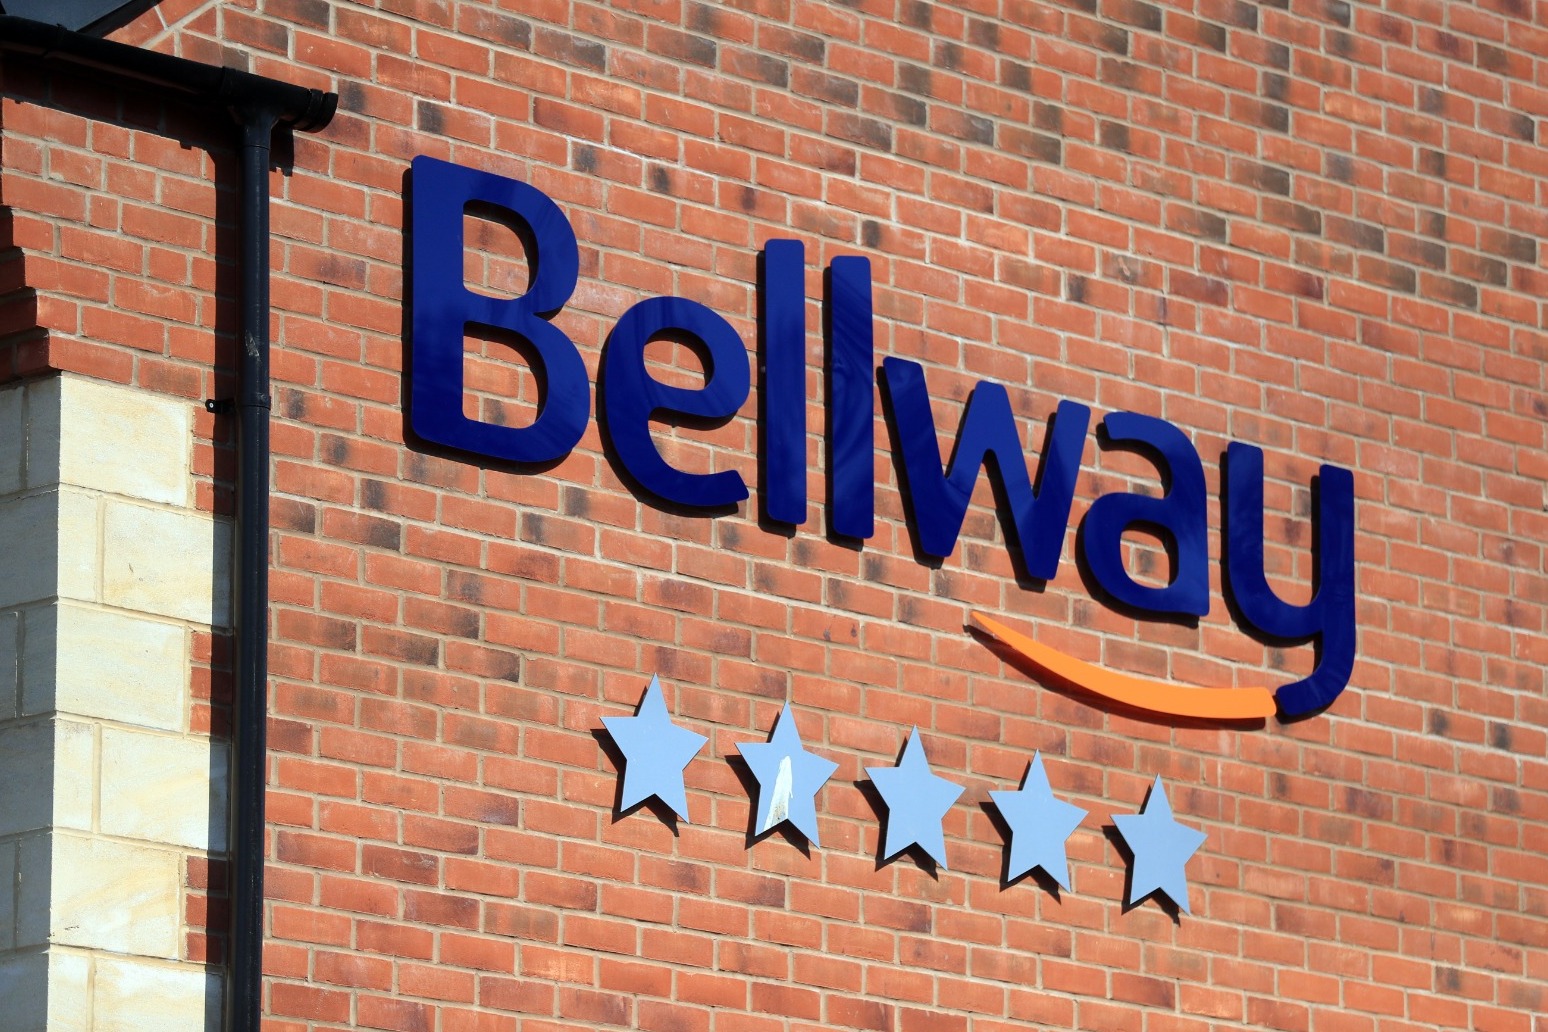 Bellway sees buyer demand drop amid soaring mortgage rates and economic woes 